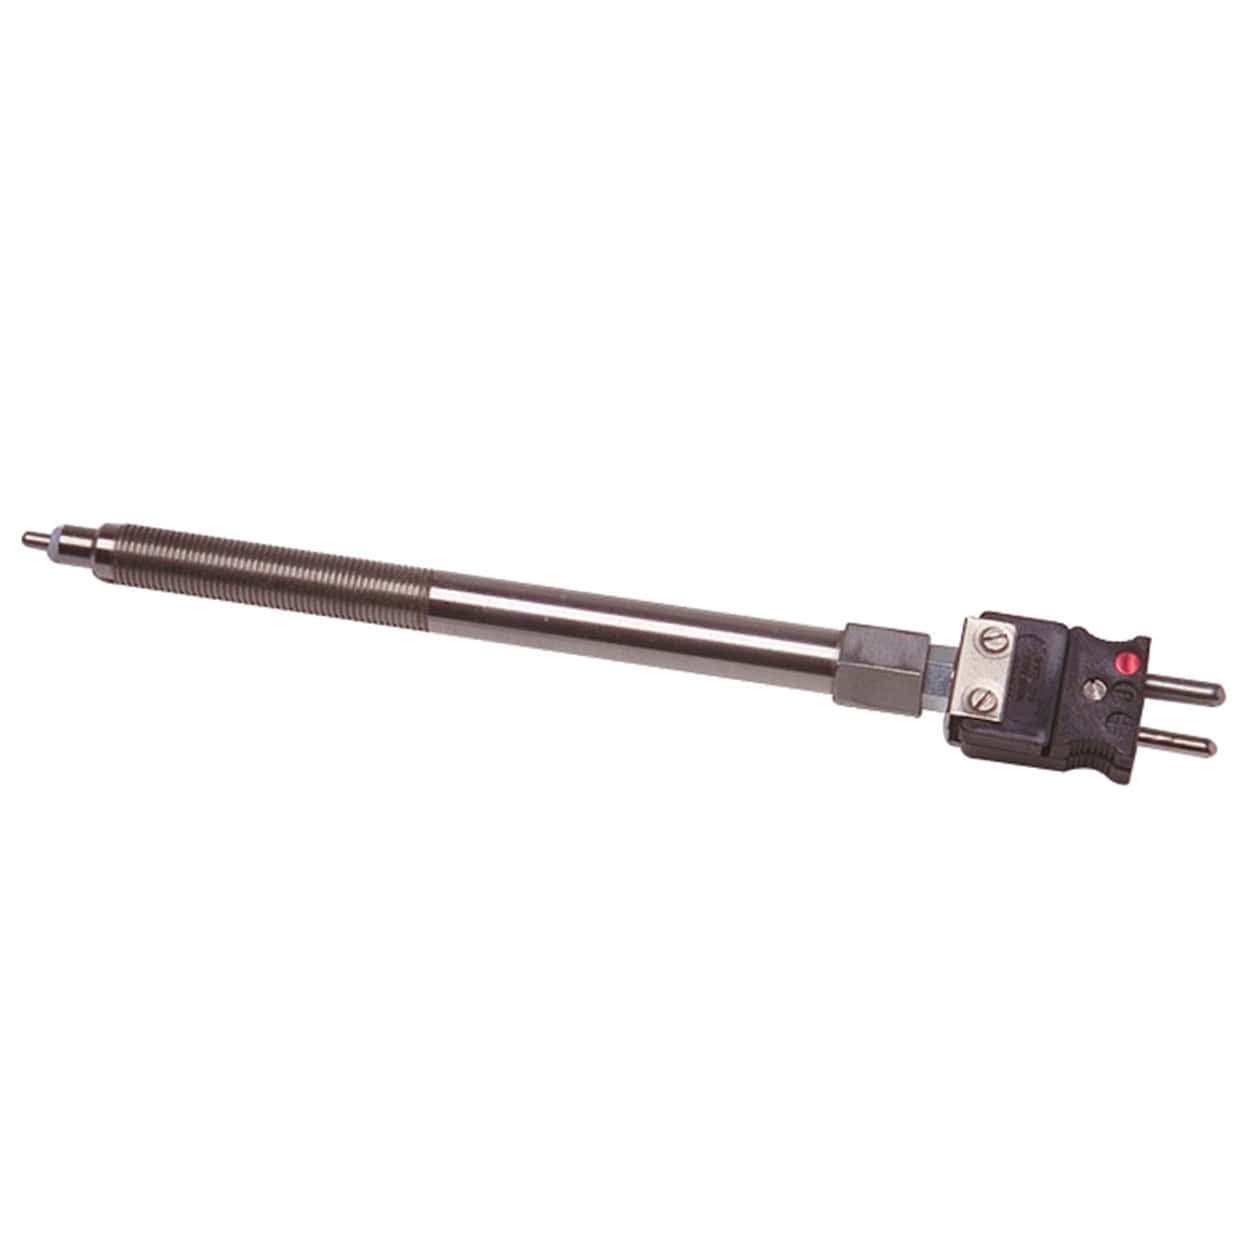 TEMPCO STYLE TMB MELT BOLT THERMOCOUPLES